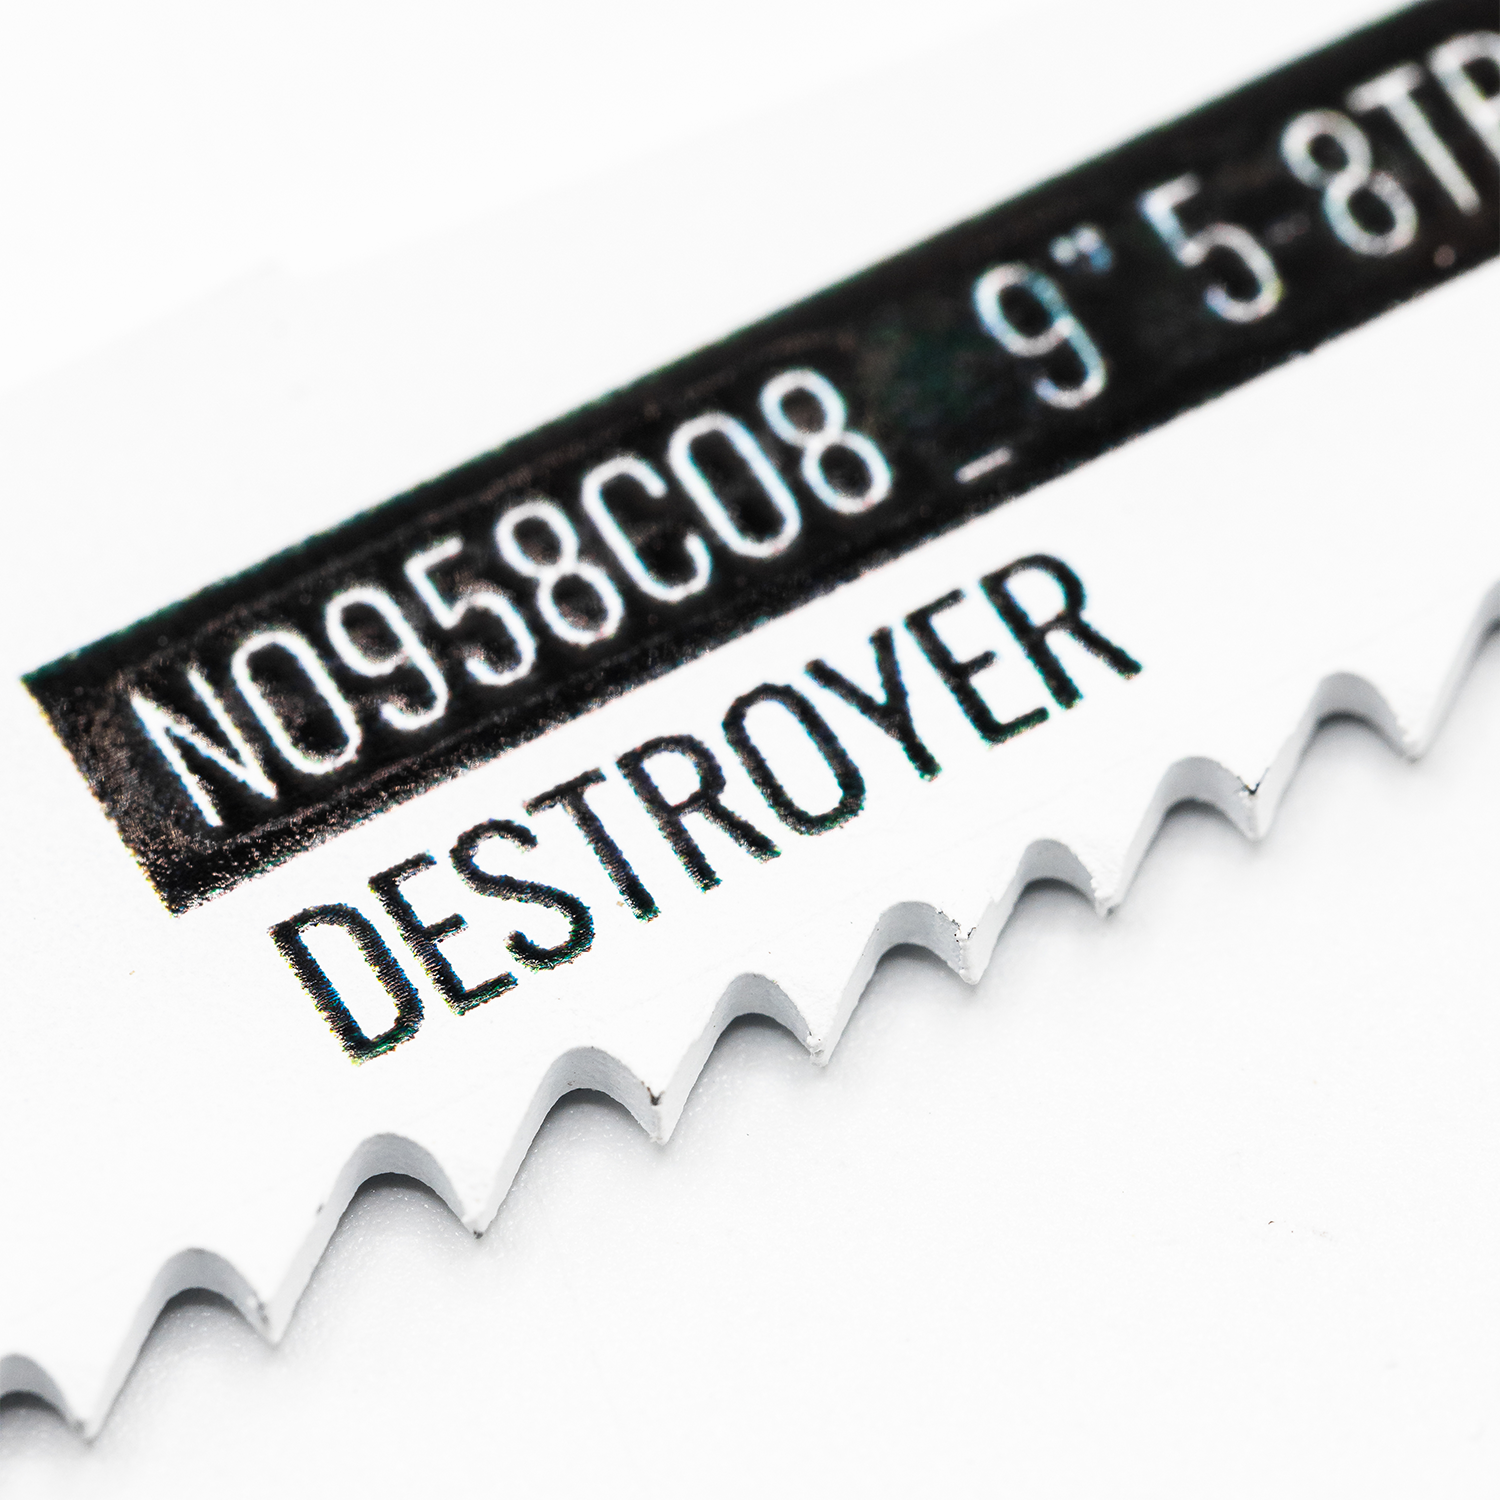 Destroyer reciprocating saw blade for wood/metal 225mm